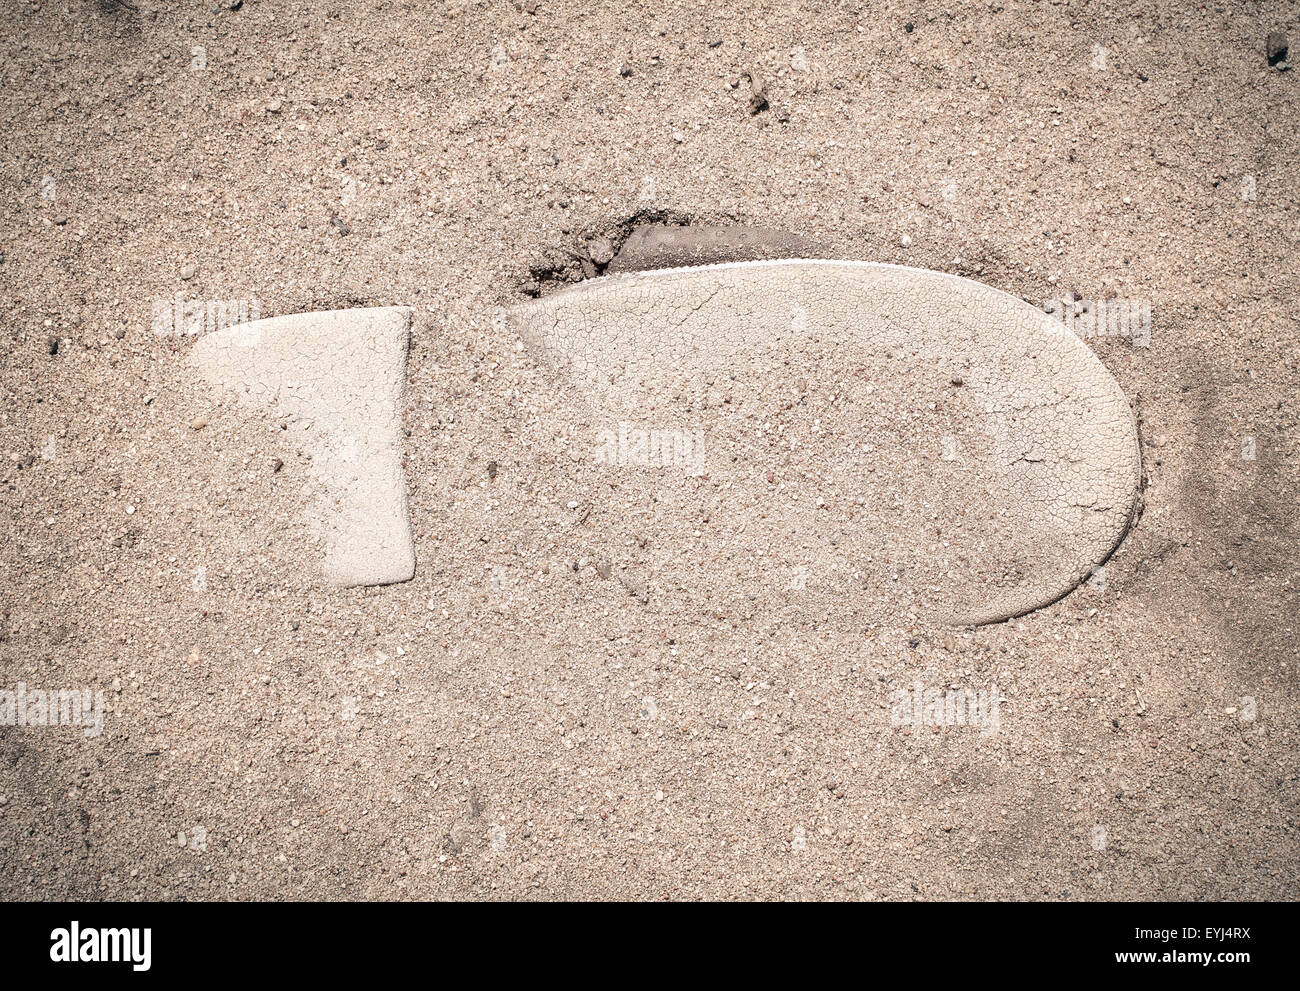 Sole of a shoe on the sand, symbol travel, trip, journey Stock Photo